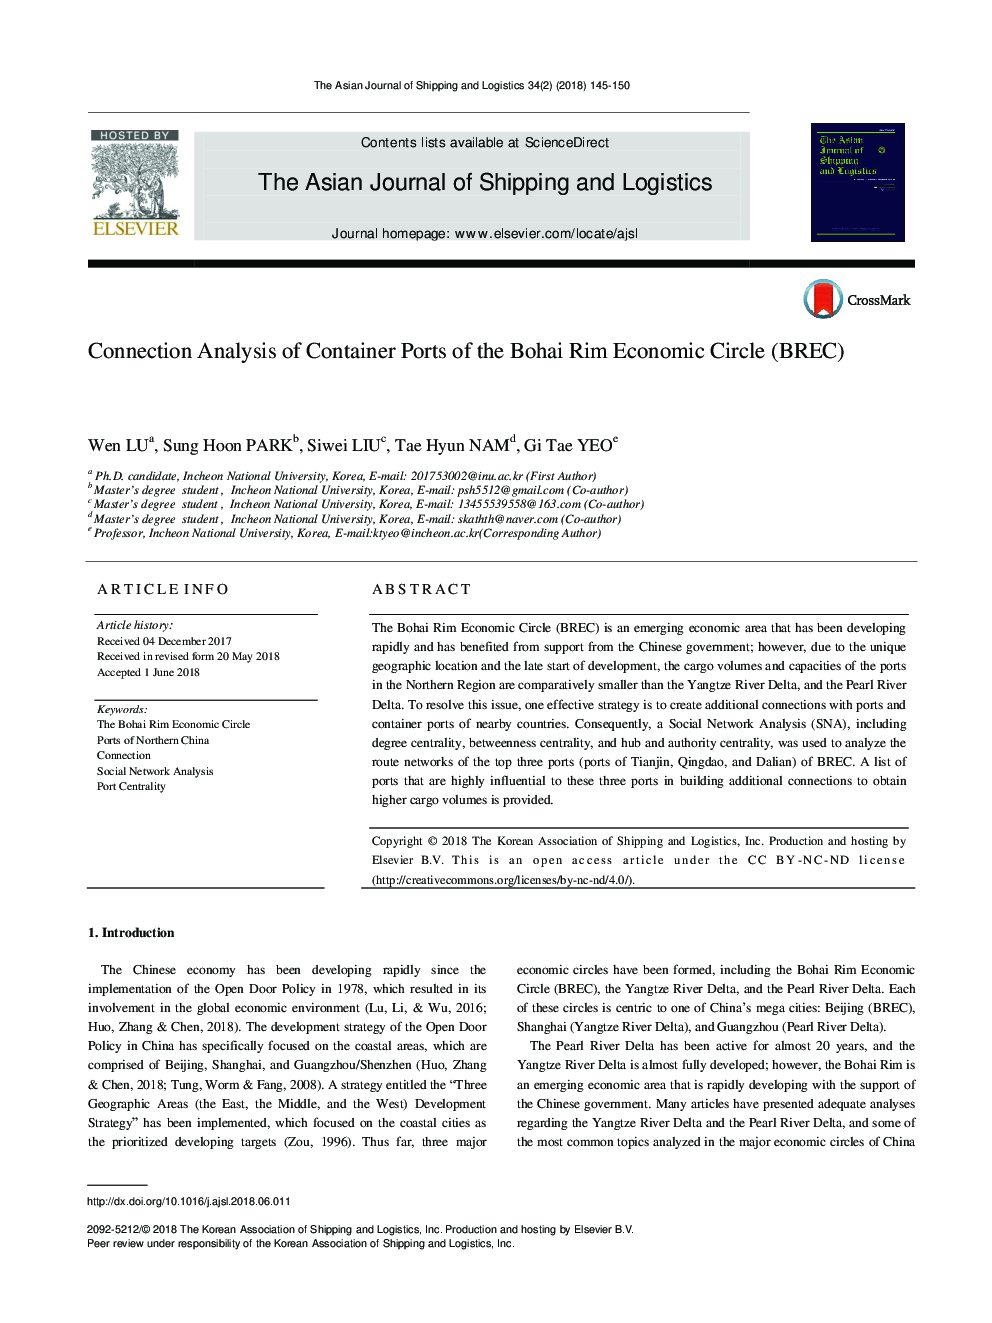 Connection Analysis of Container Ports of the Bohai Rim Economic Circle (BREC)